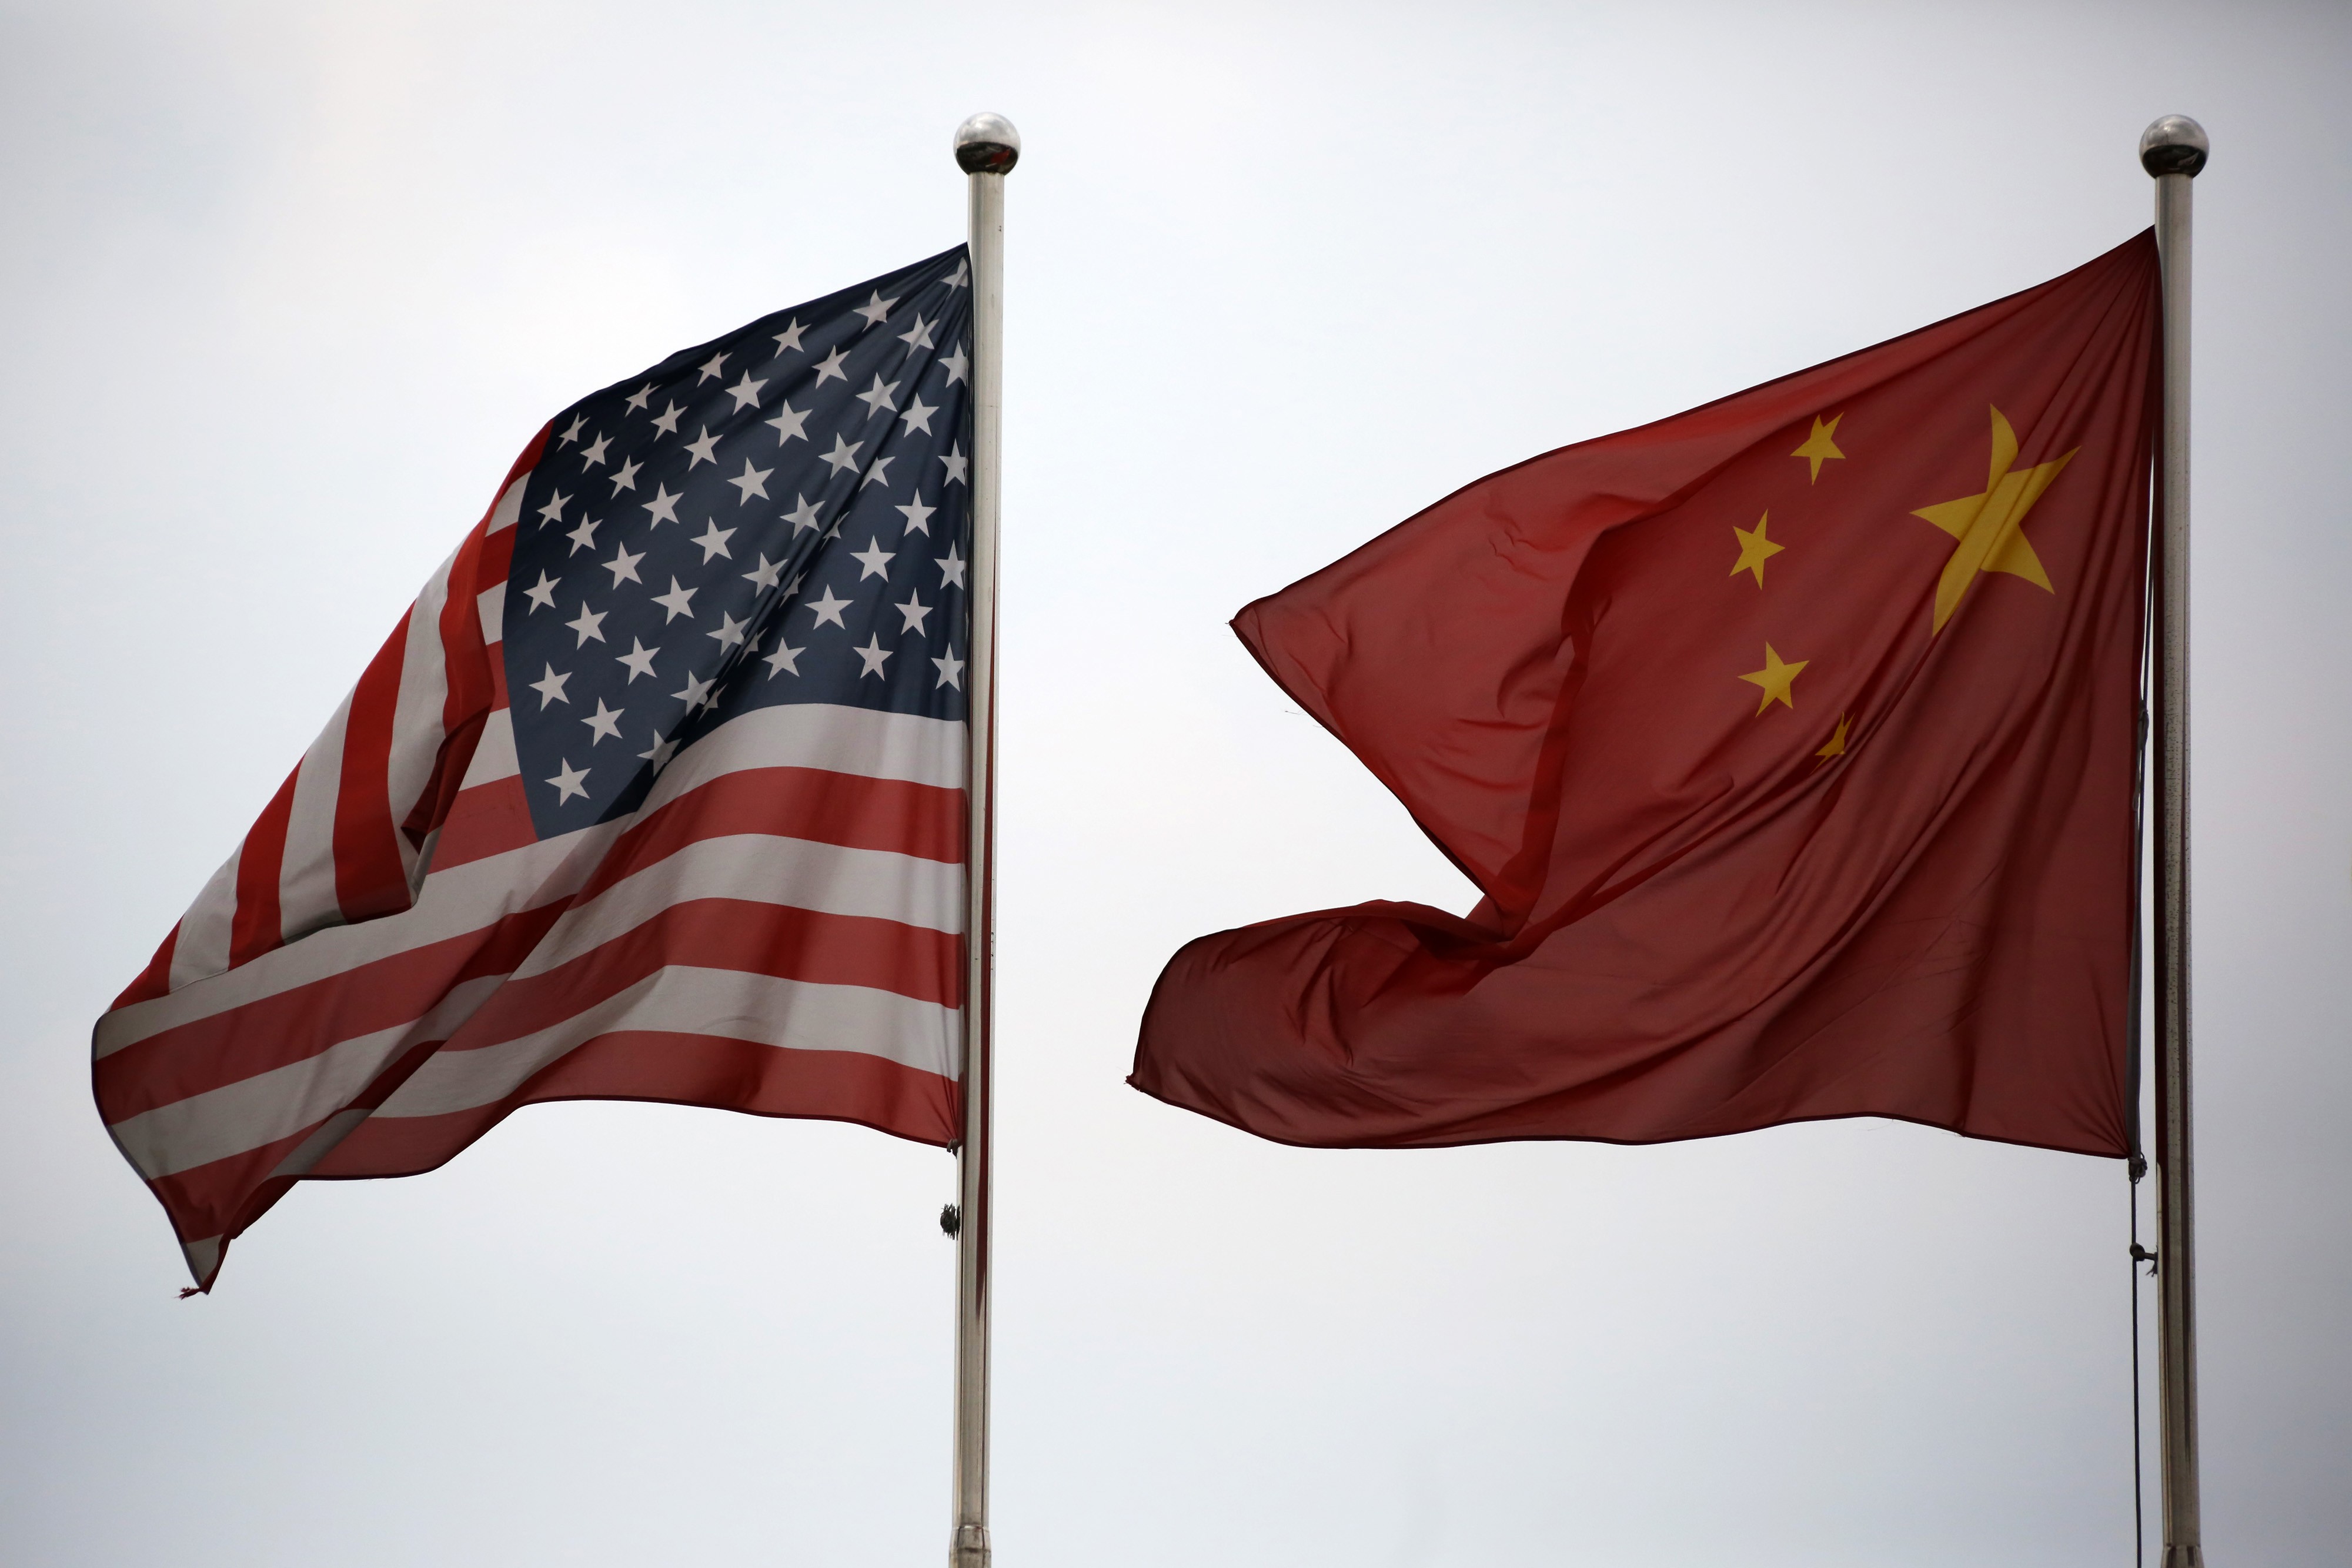 China exported US$506 billion worth of goods to the United States in 2017. Photo: Bloomberg